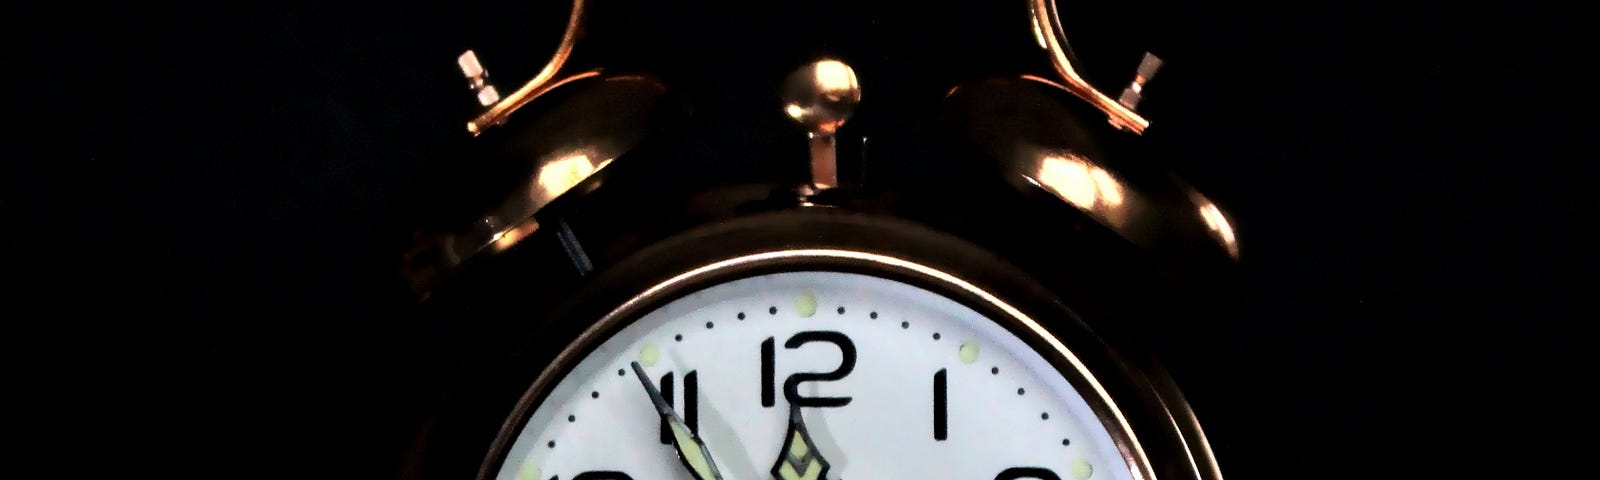 An analog clock set to five minutes before midnight against a black background.